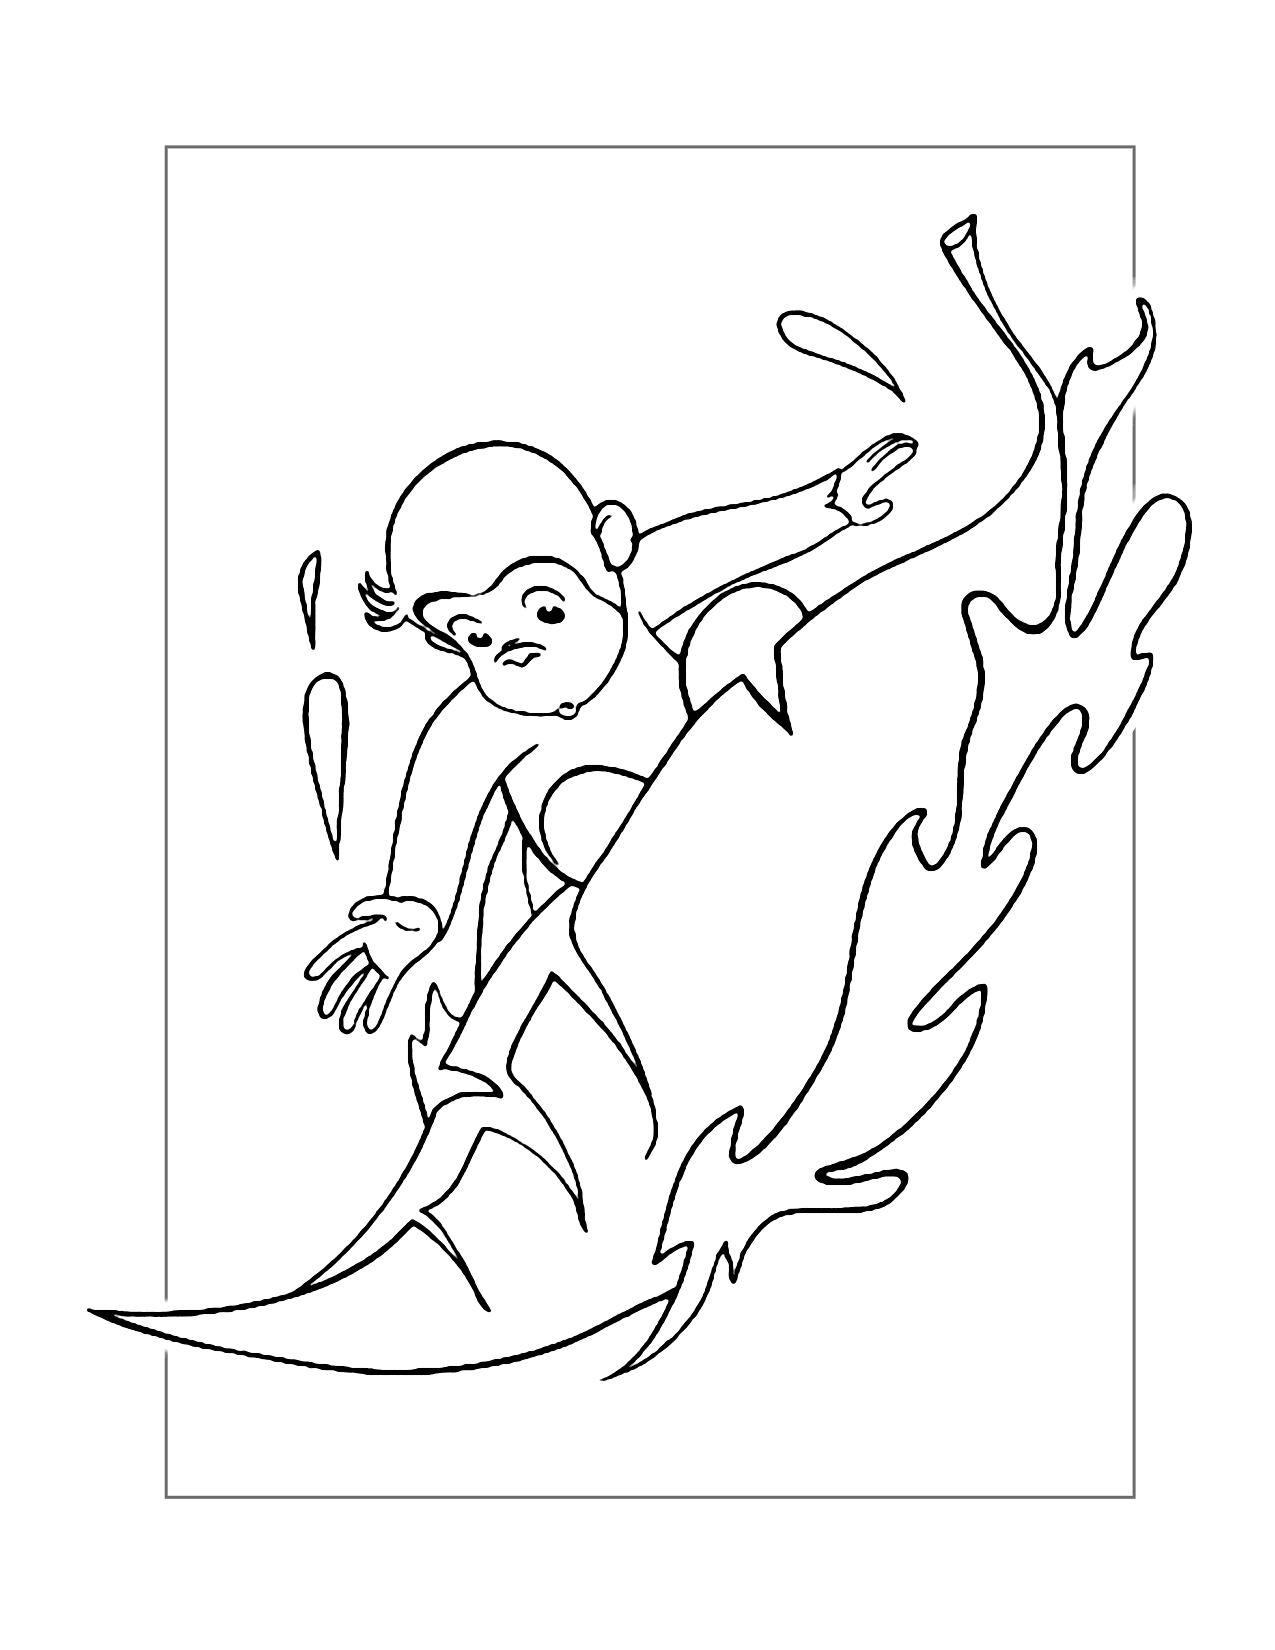 Curious George Surfing Coloring Page